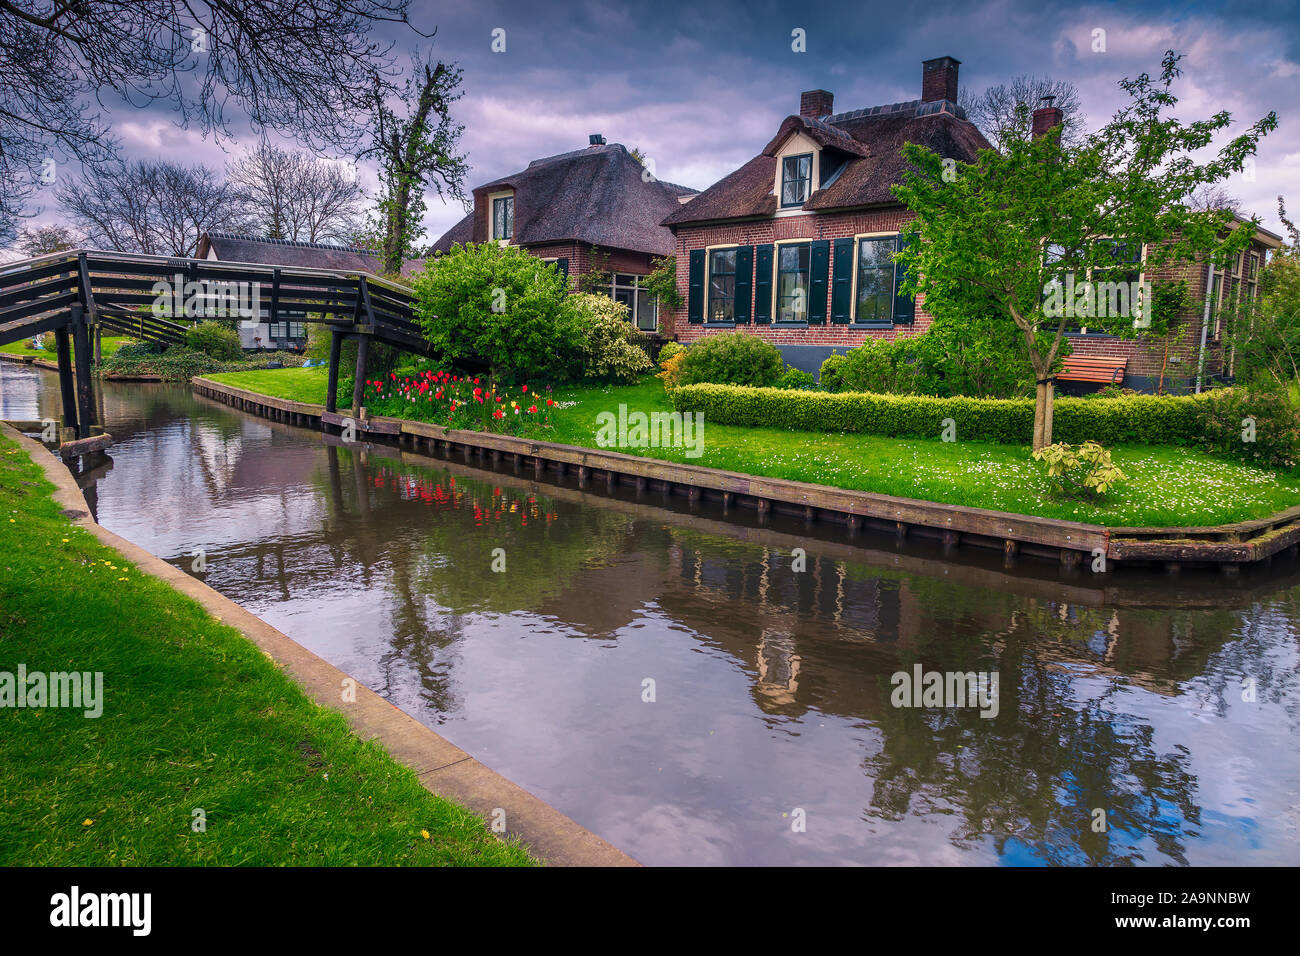 Fabulous touristic village with narrow water canals. Cute thatched houses with ornamental gardens in Giethoorn village, Netherlands, Europe Stock Photo